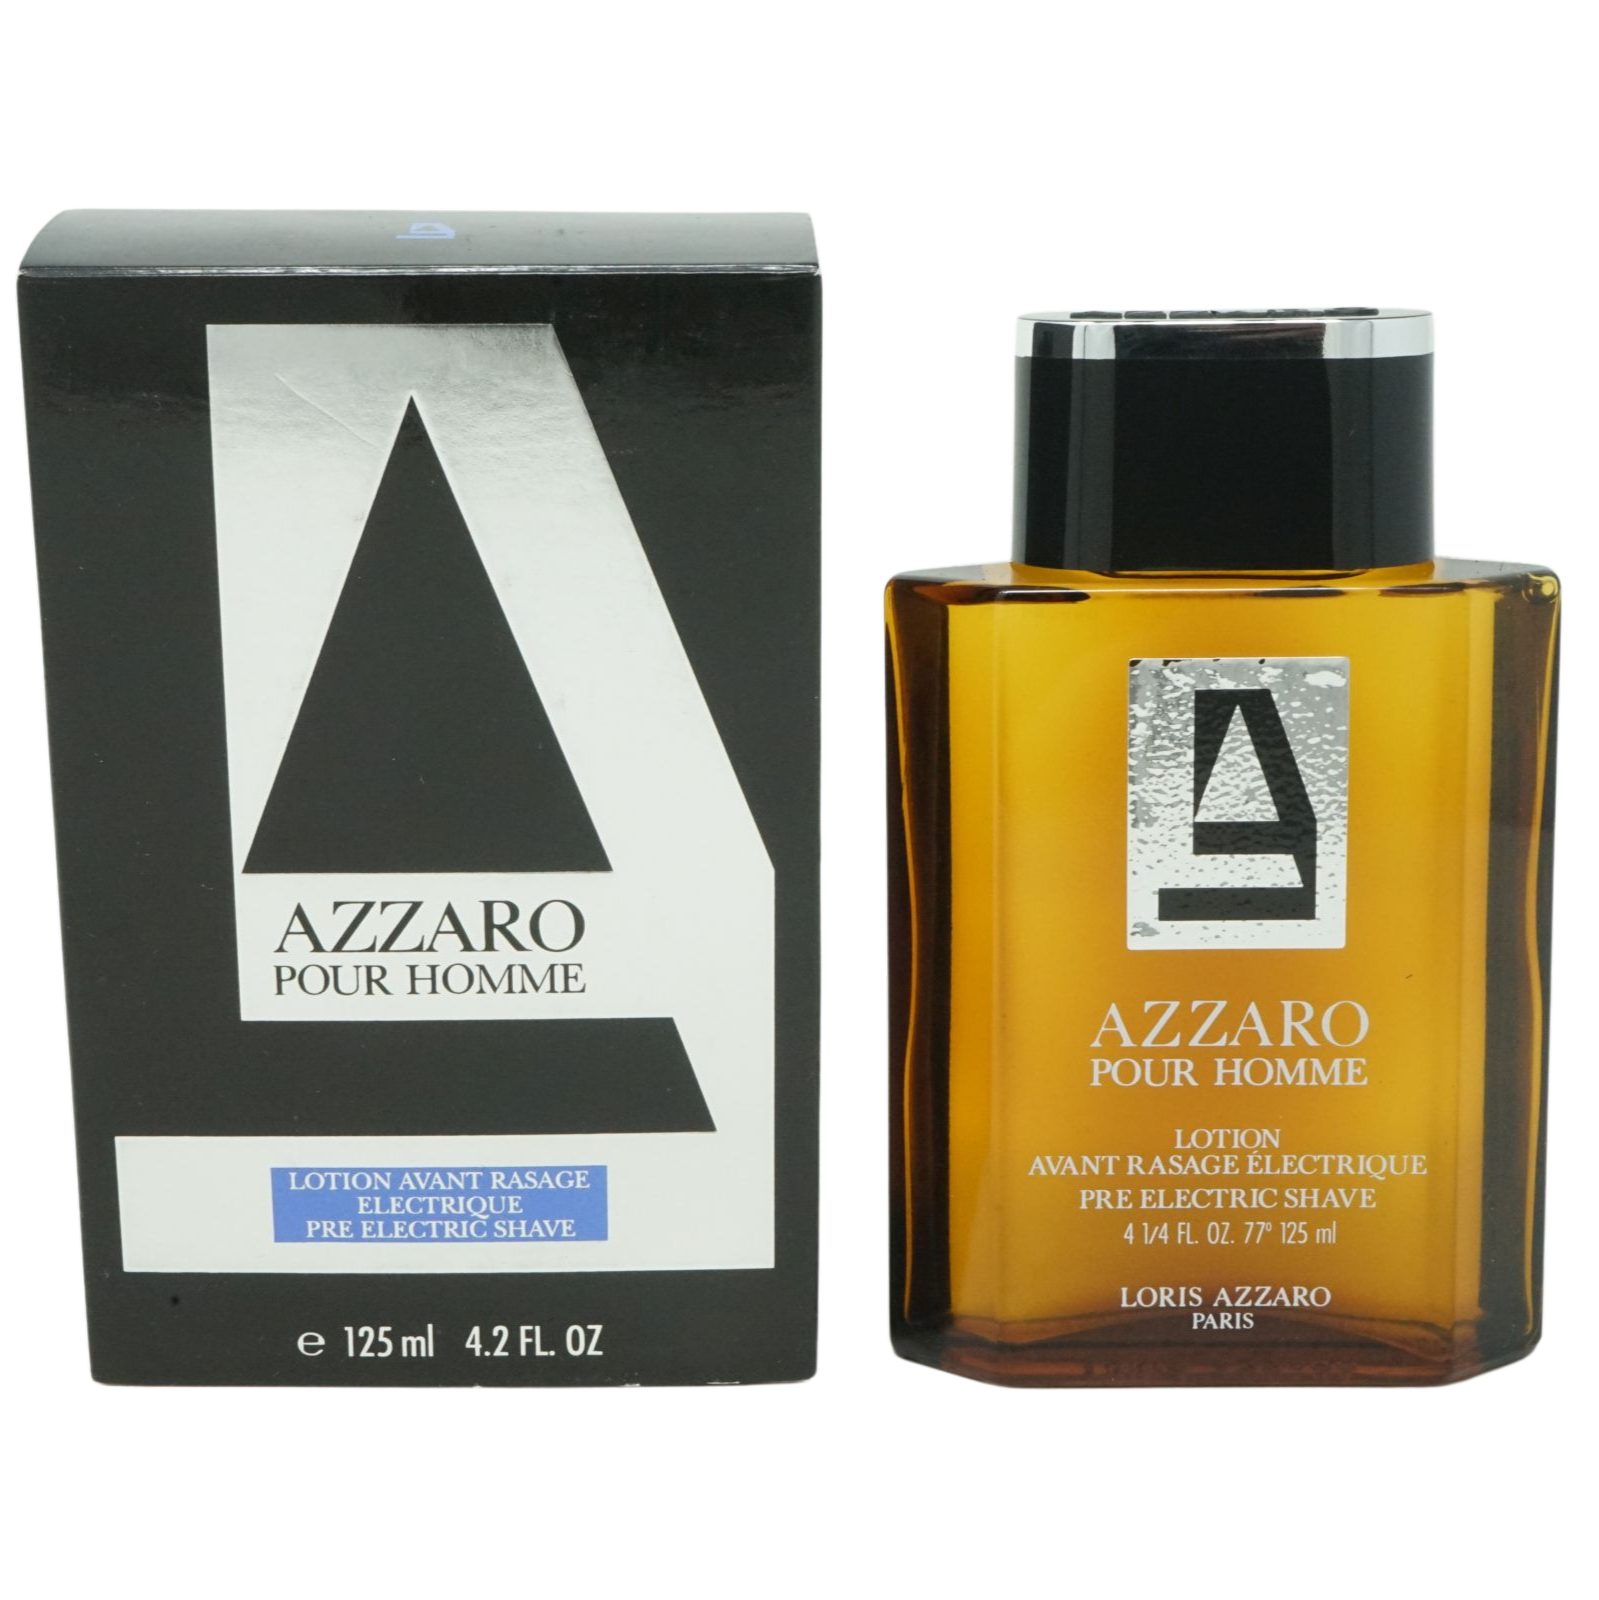 Azzaro After-Shave Azzaro pour homme Lotion Avant Rasage 125ml | Aftershaves